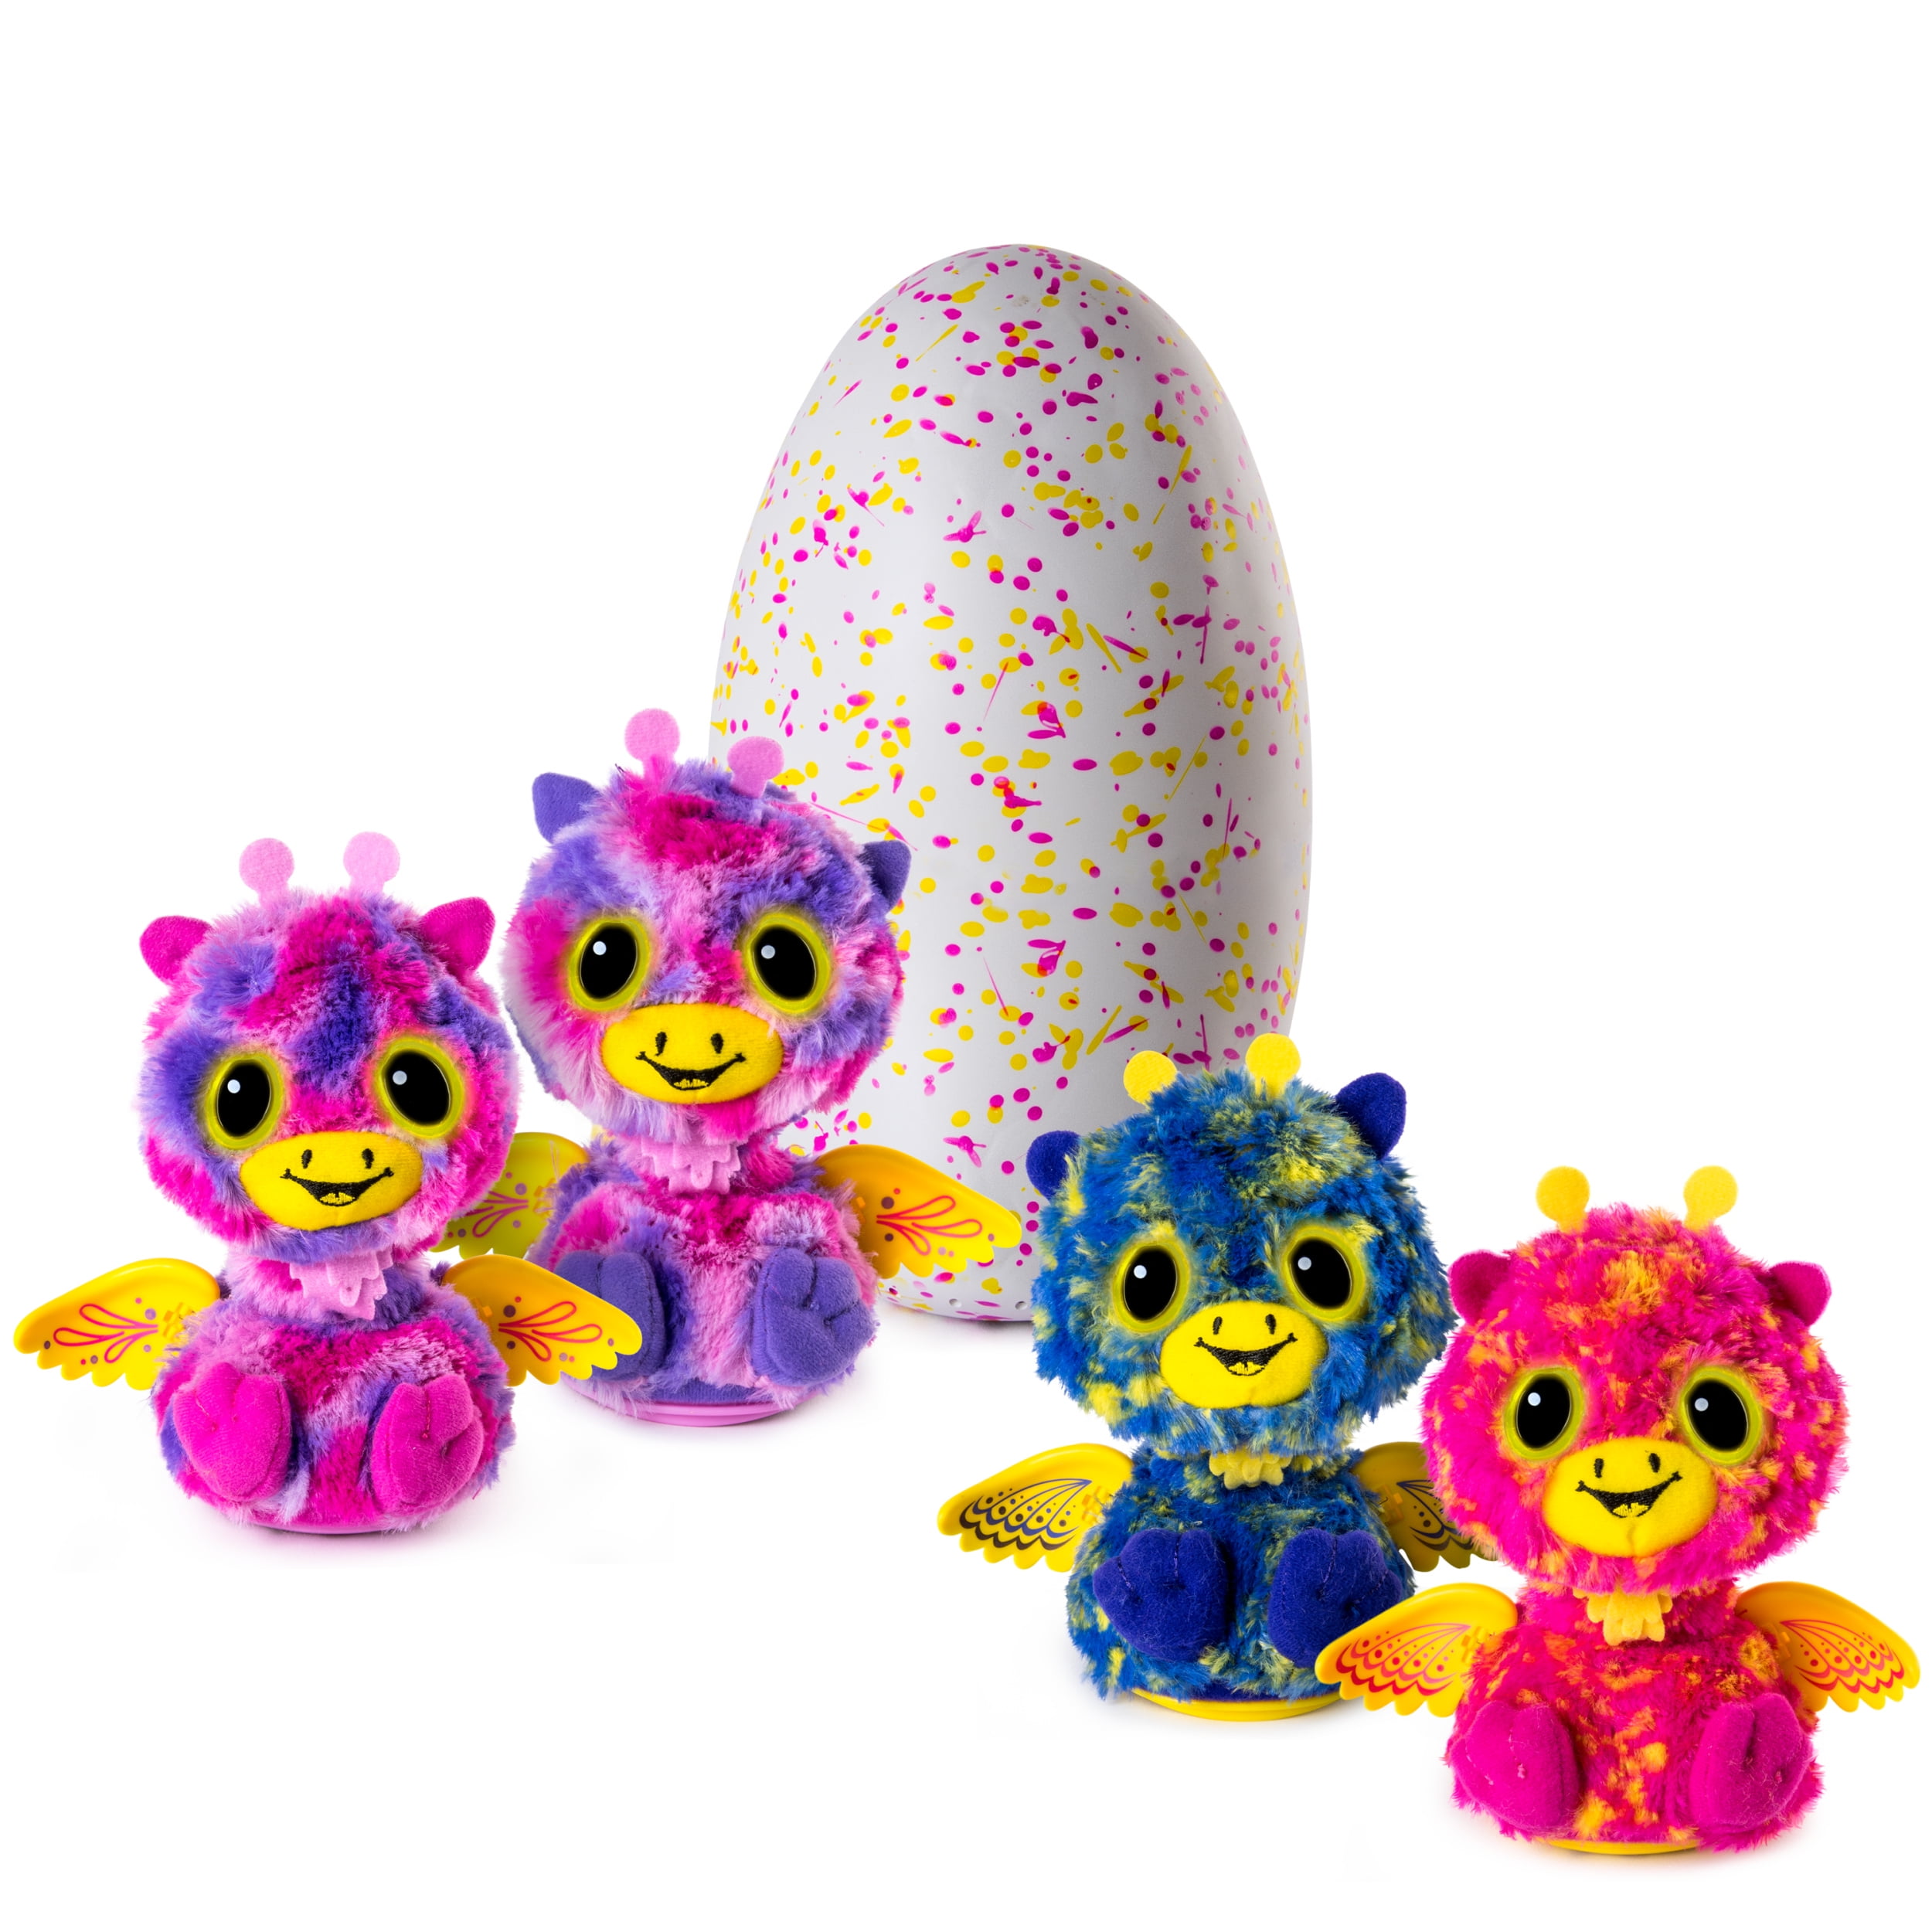 Giraven Spin Master Hatchimals Surprise Twin 6037095 Ships ASAP Ages 5 